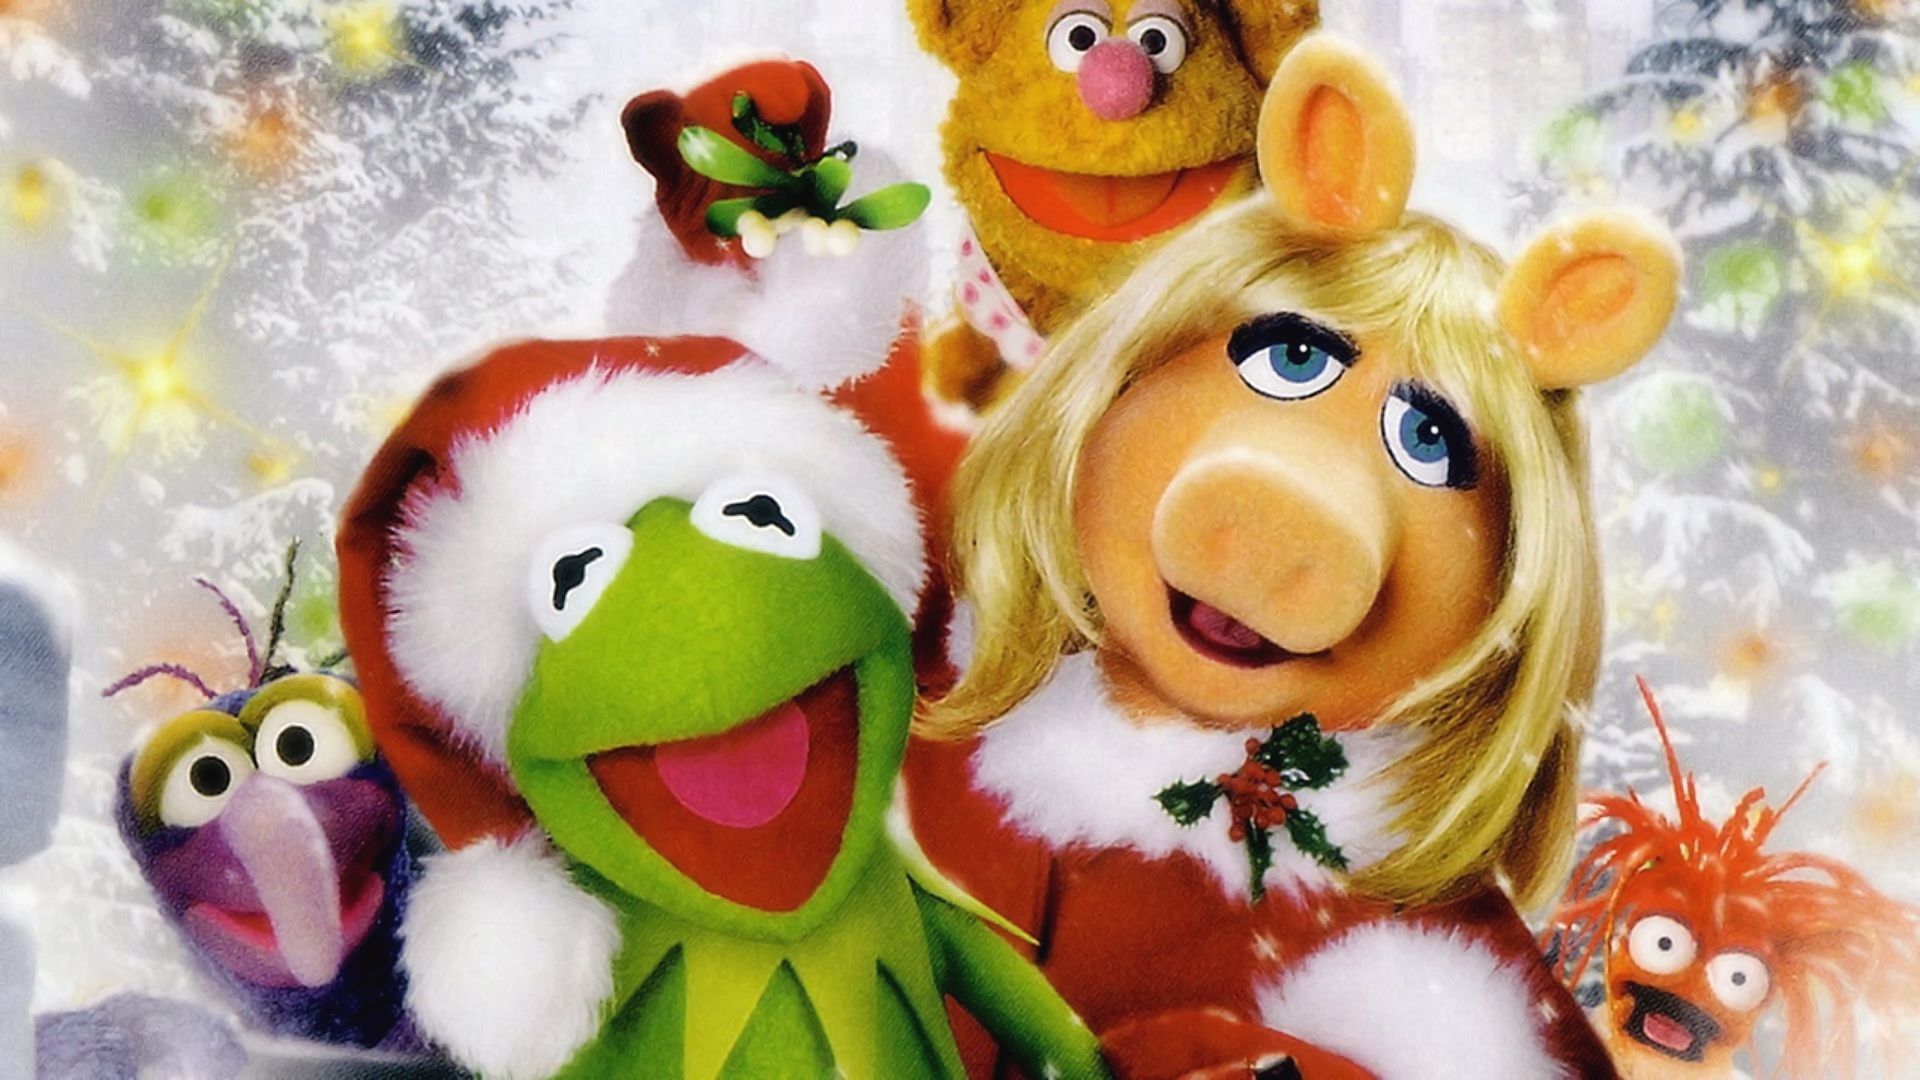 It's a Very Merry Muppet Christmas Movie background